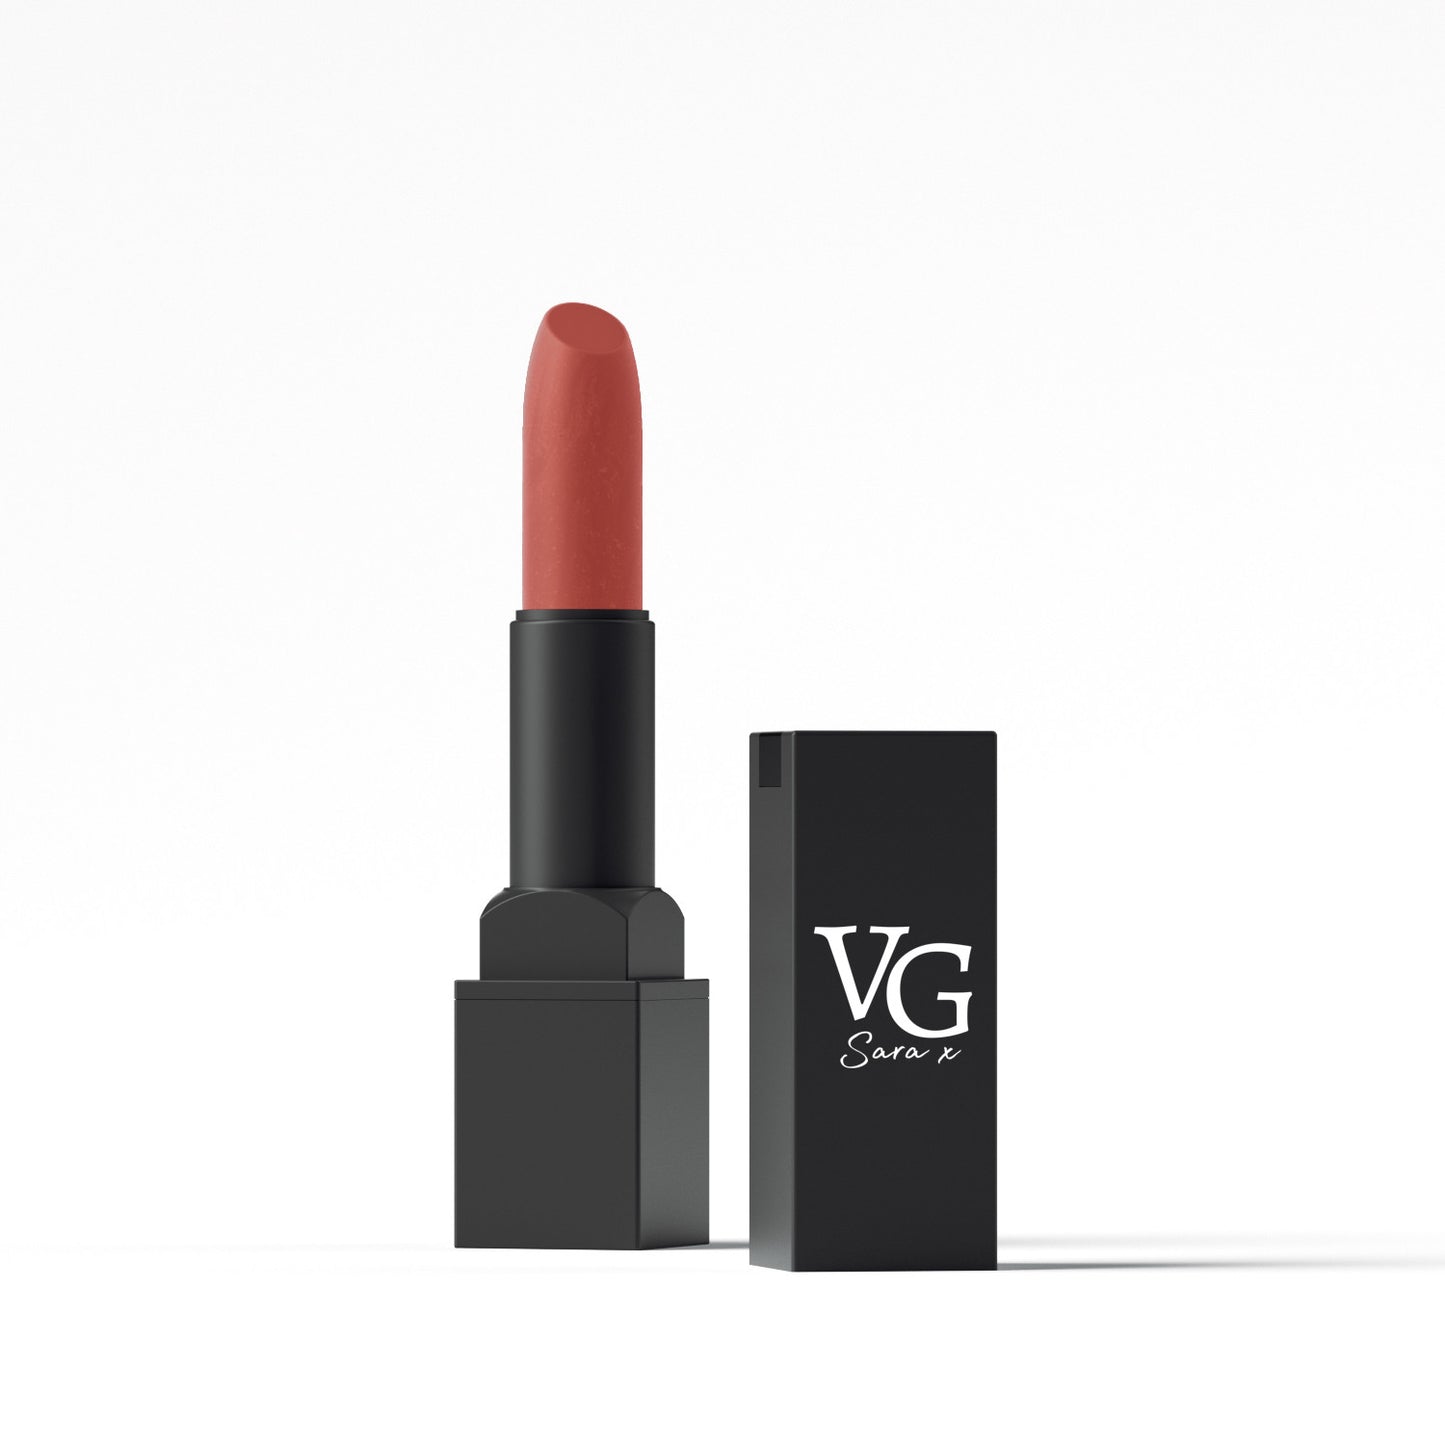 VG lipstick angled to show the product tip